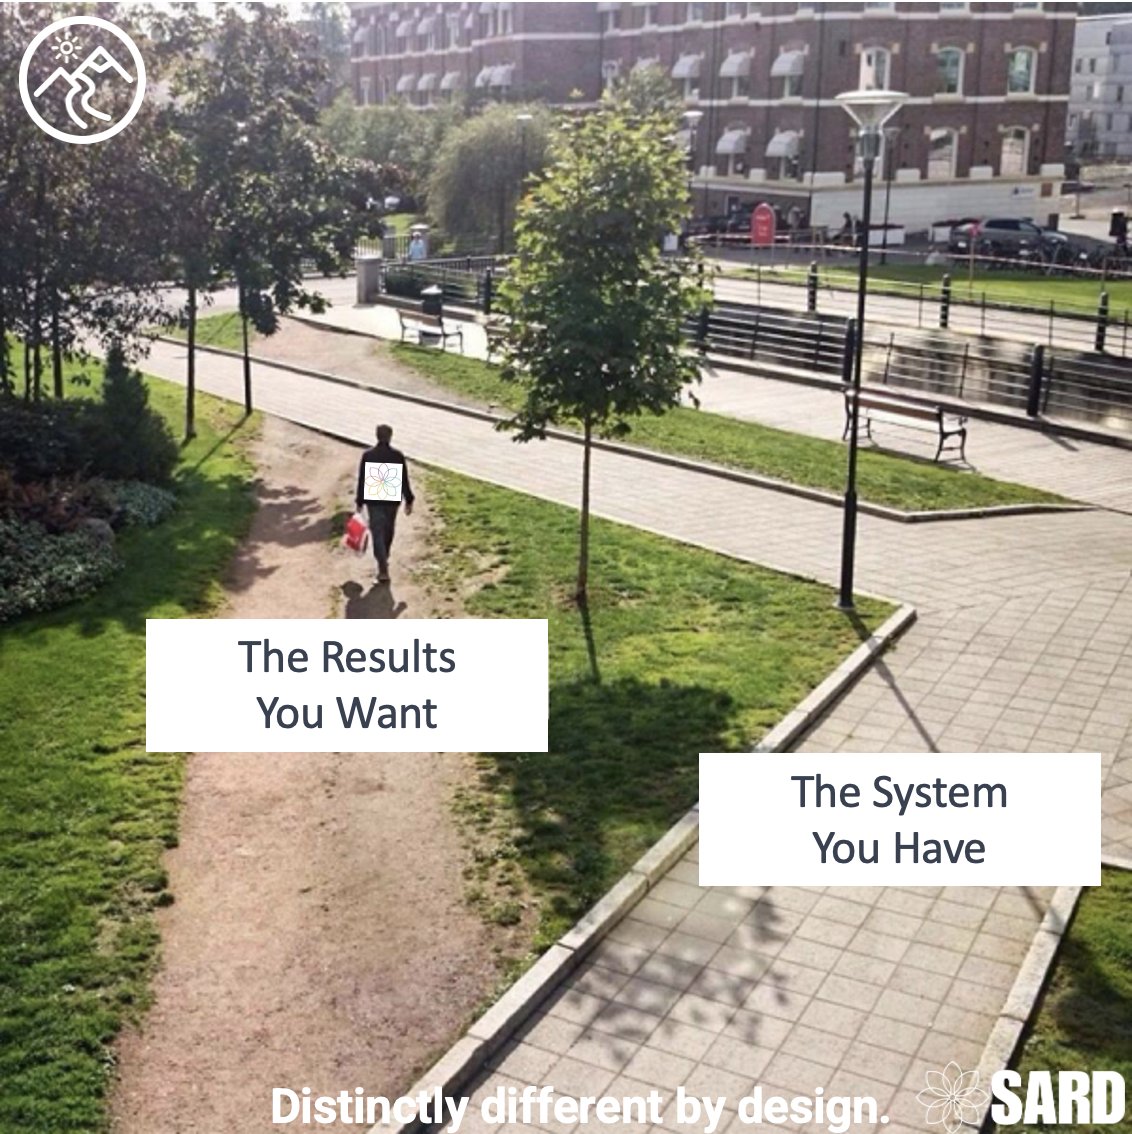 The results you want aren't far away. 
We can get you on the right path.

Email: discovery@sardjv.co.uk to find out more.

@SARDJV 
@CompareSoftware 
@KevinMonk 
#nhs #nhsworkforce #planning #workforce